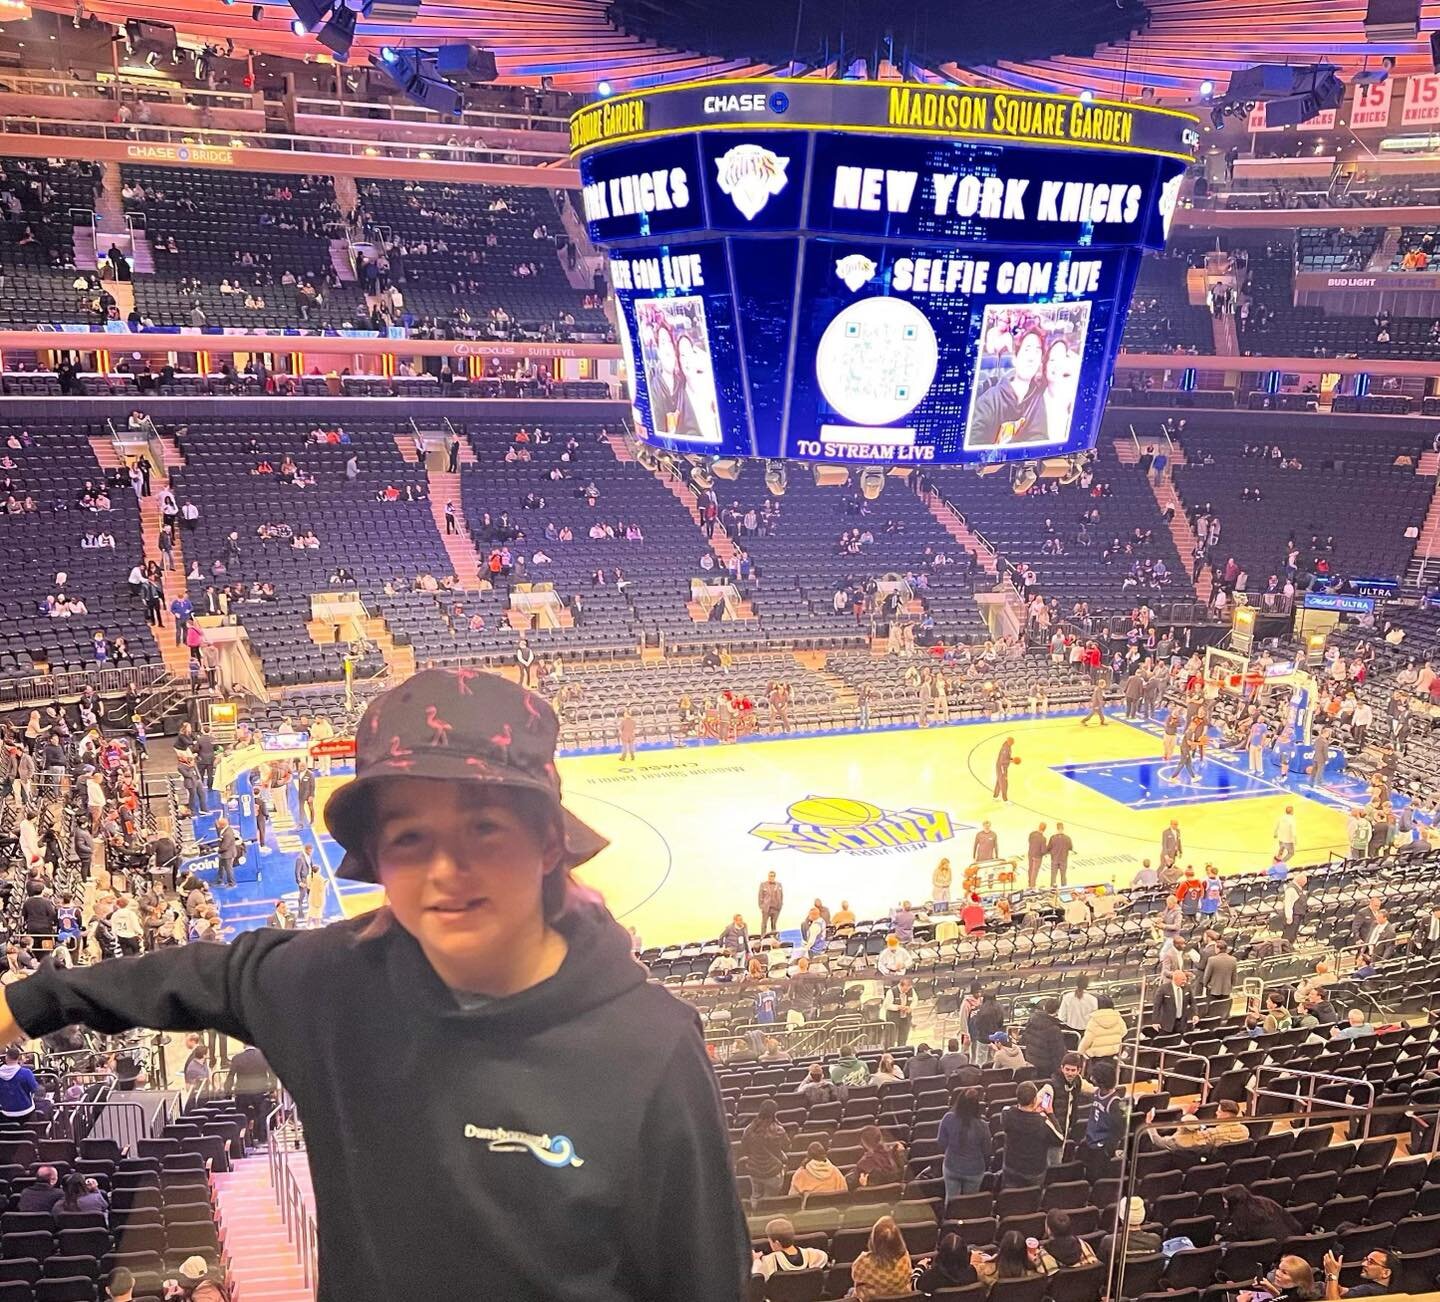 Duns kids on tour. 🇺🇸 Lenny Tierney at Maddison Square Garden in NYC watching the Knicks. 🏀 Representing Duns Bball Club in his hoodie.

#dunsboroughbasketball #ontour #newyorknewyork #nyknicks #nyknicksbasketball